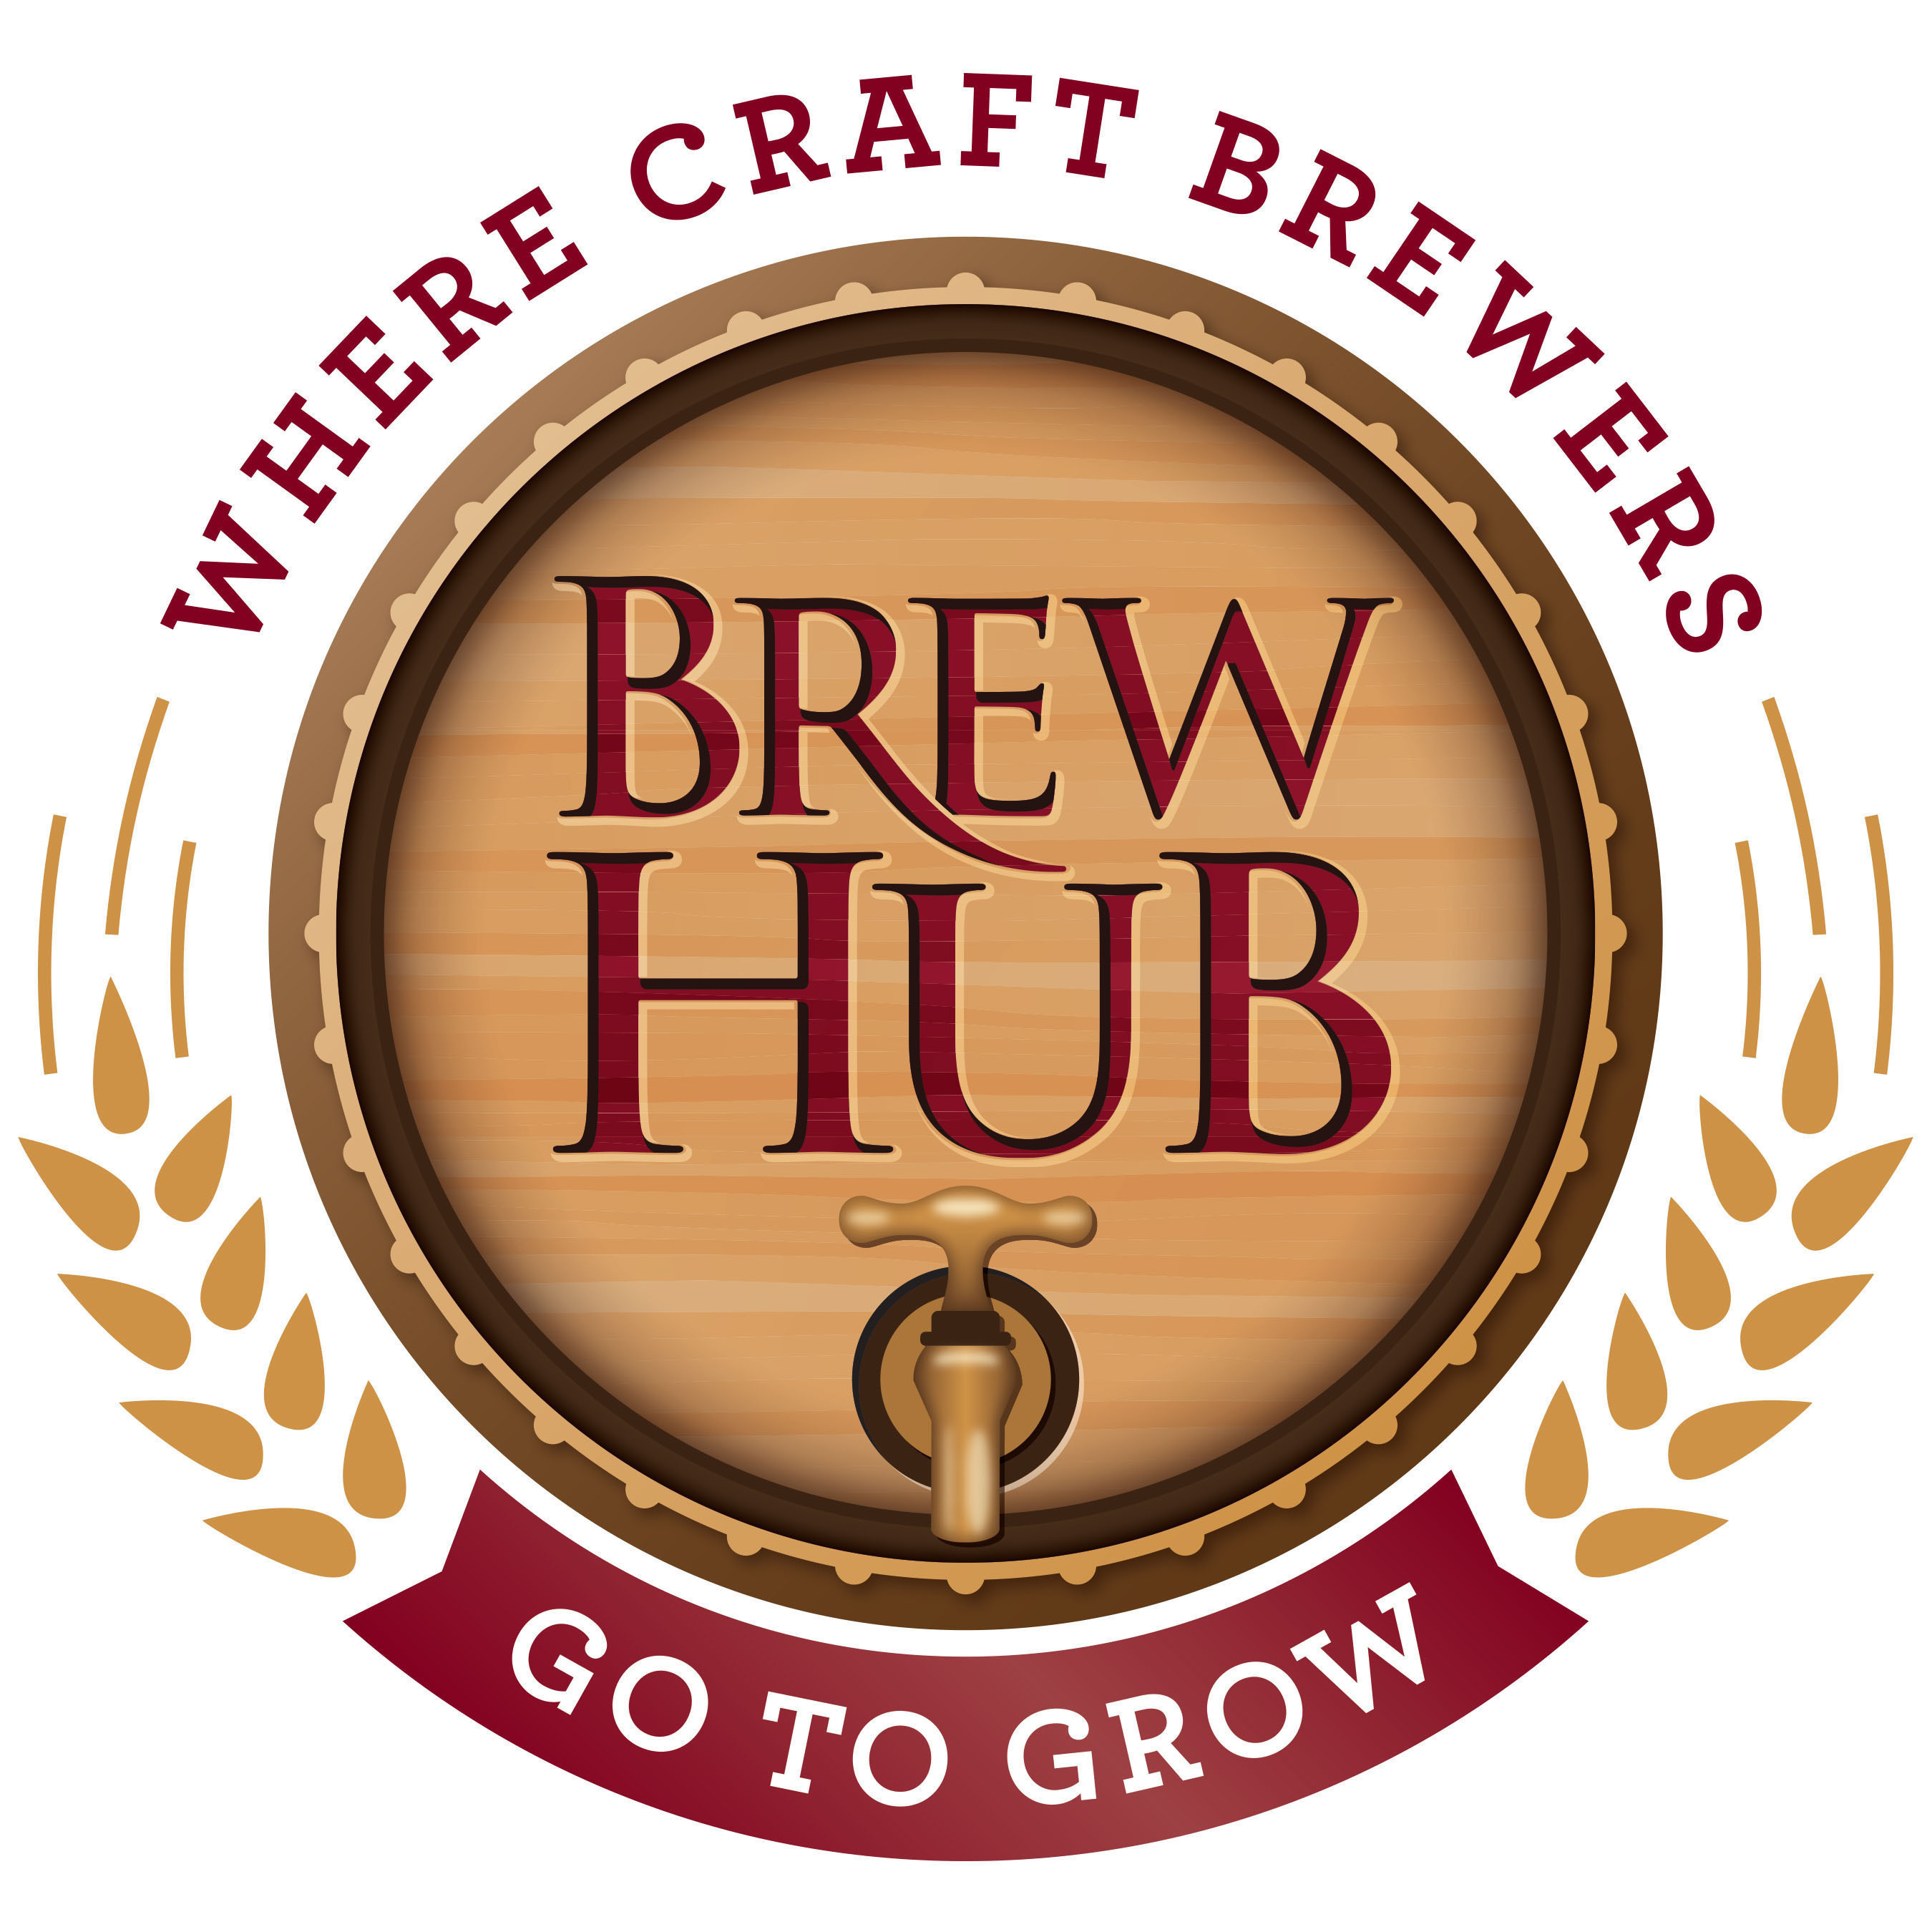 Brew Hub provides full brewing, packaging, distribution and selling services for craft brewers that are constrained by capacity, geography or capital.